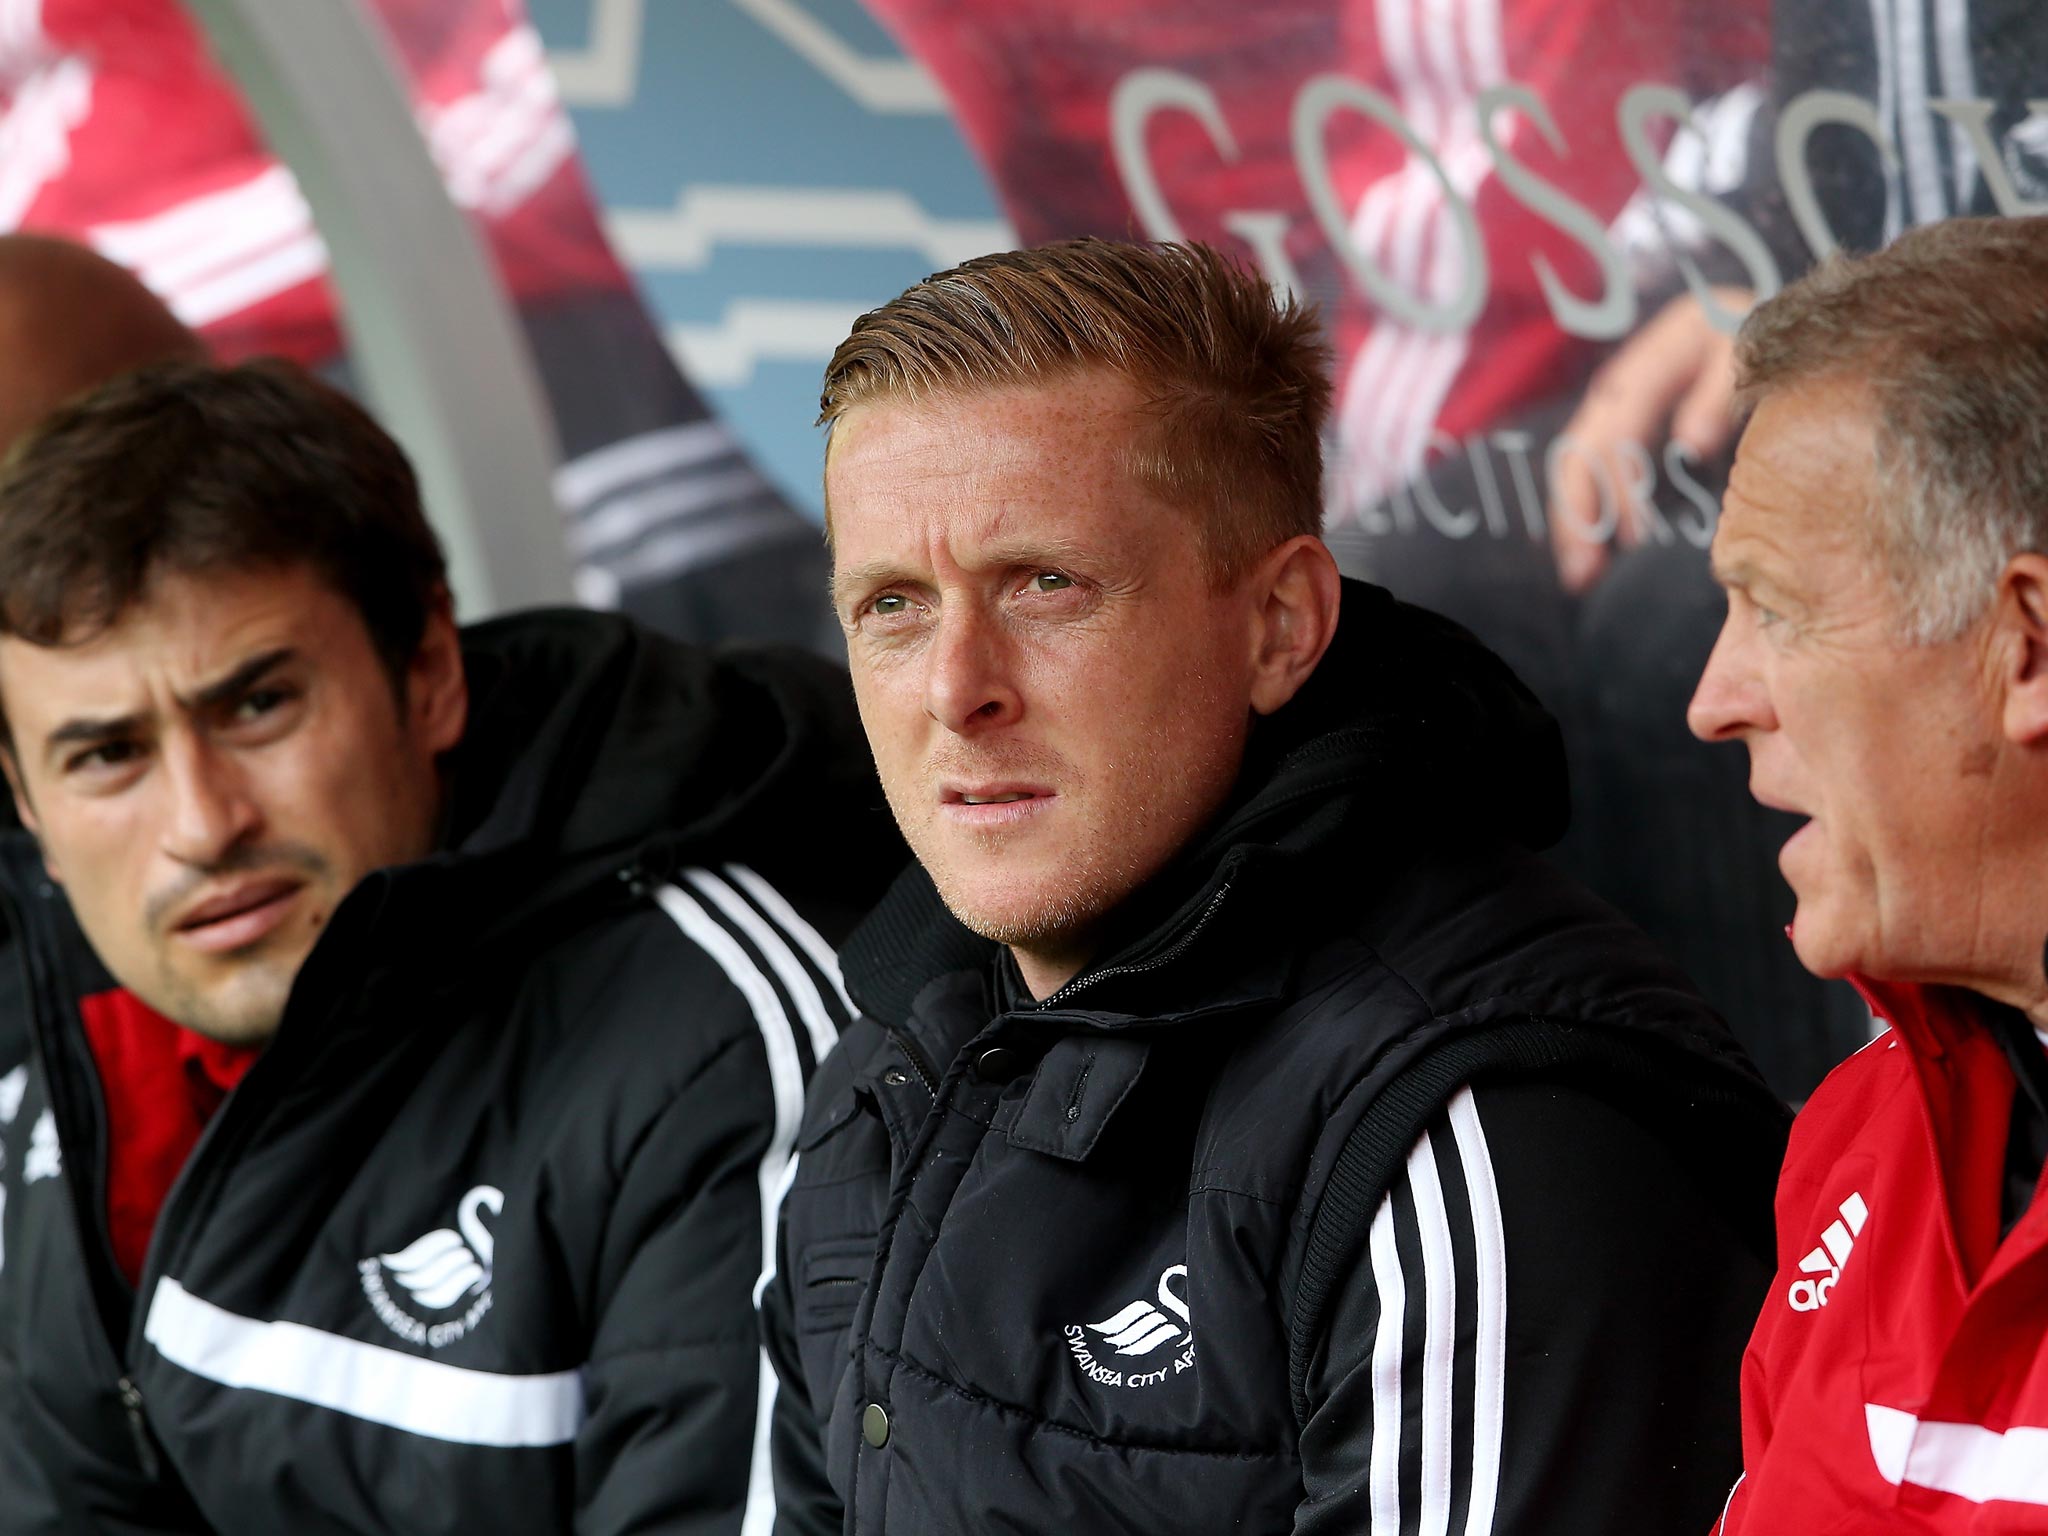 Garry Monk, manager of Swansea